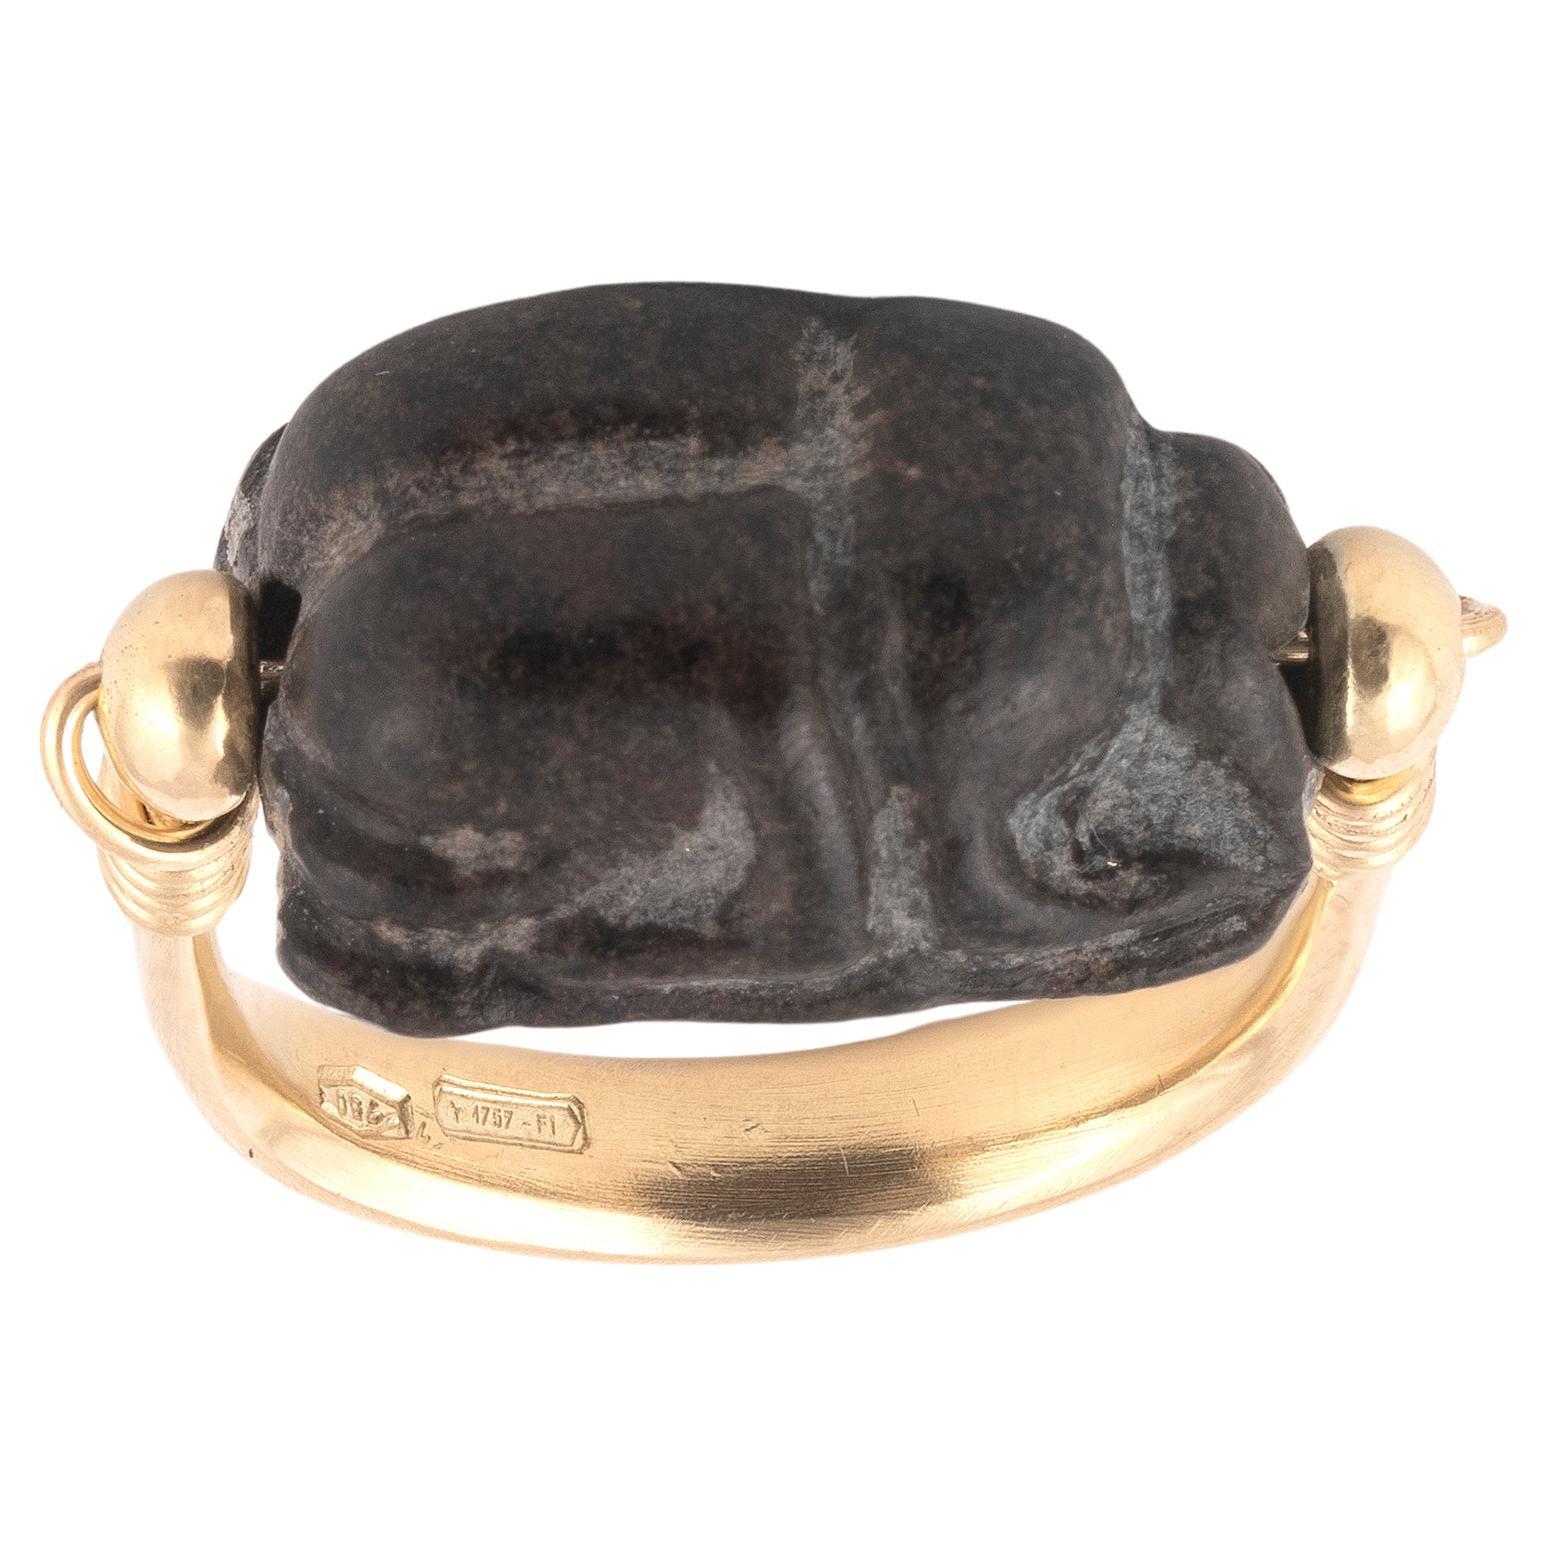 Gold Ring With An Ancient Jasper Scarab Etruscan 4th - 5th Century BC. For Sale